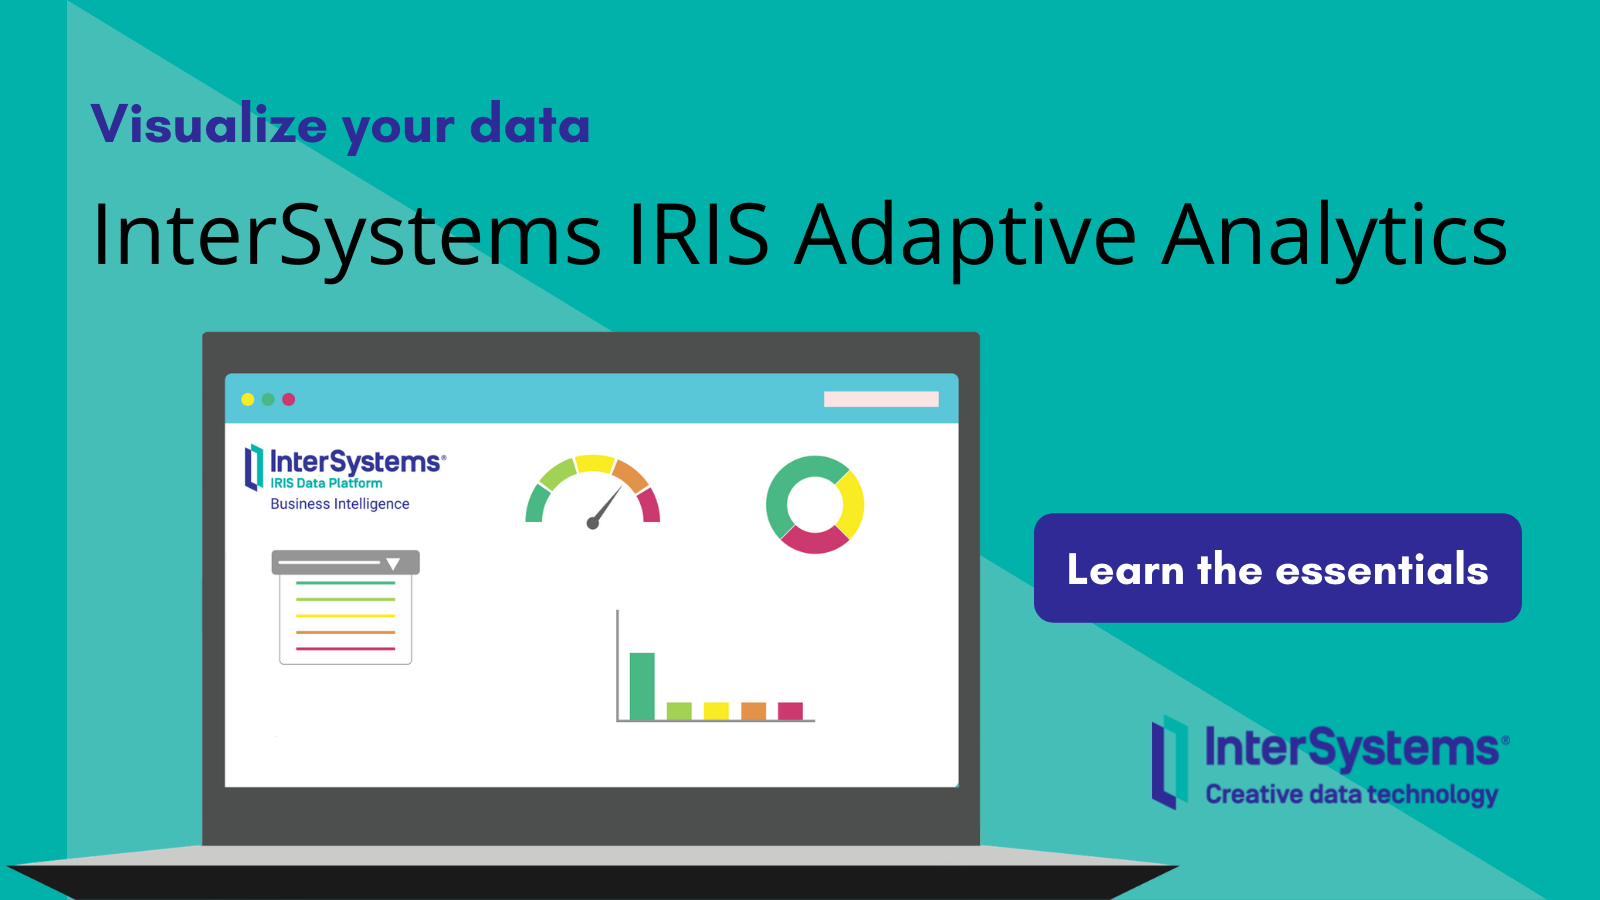 Visualize your data with InterSystems IRIS Adaptive Analytics. Learn the essentials.